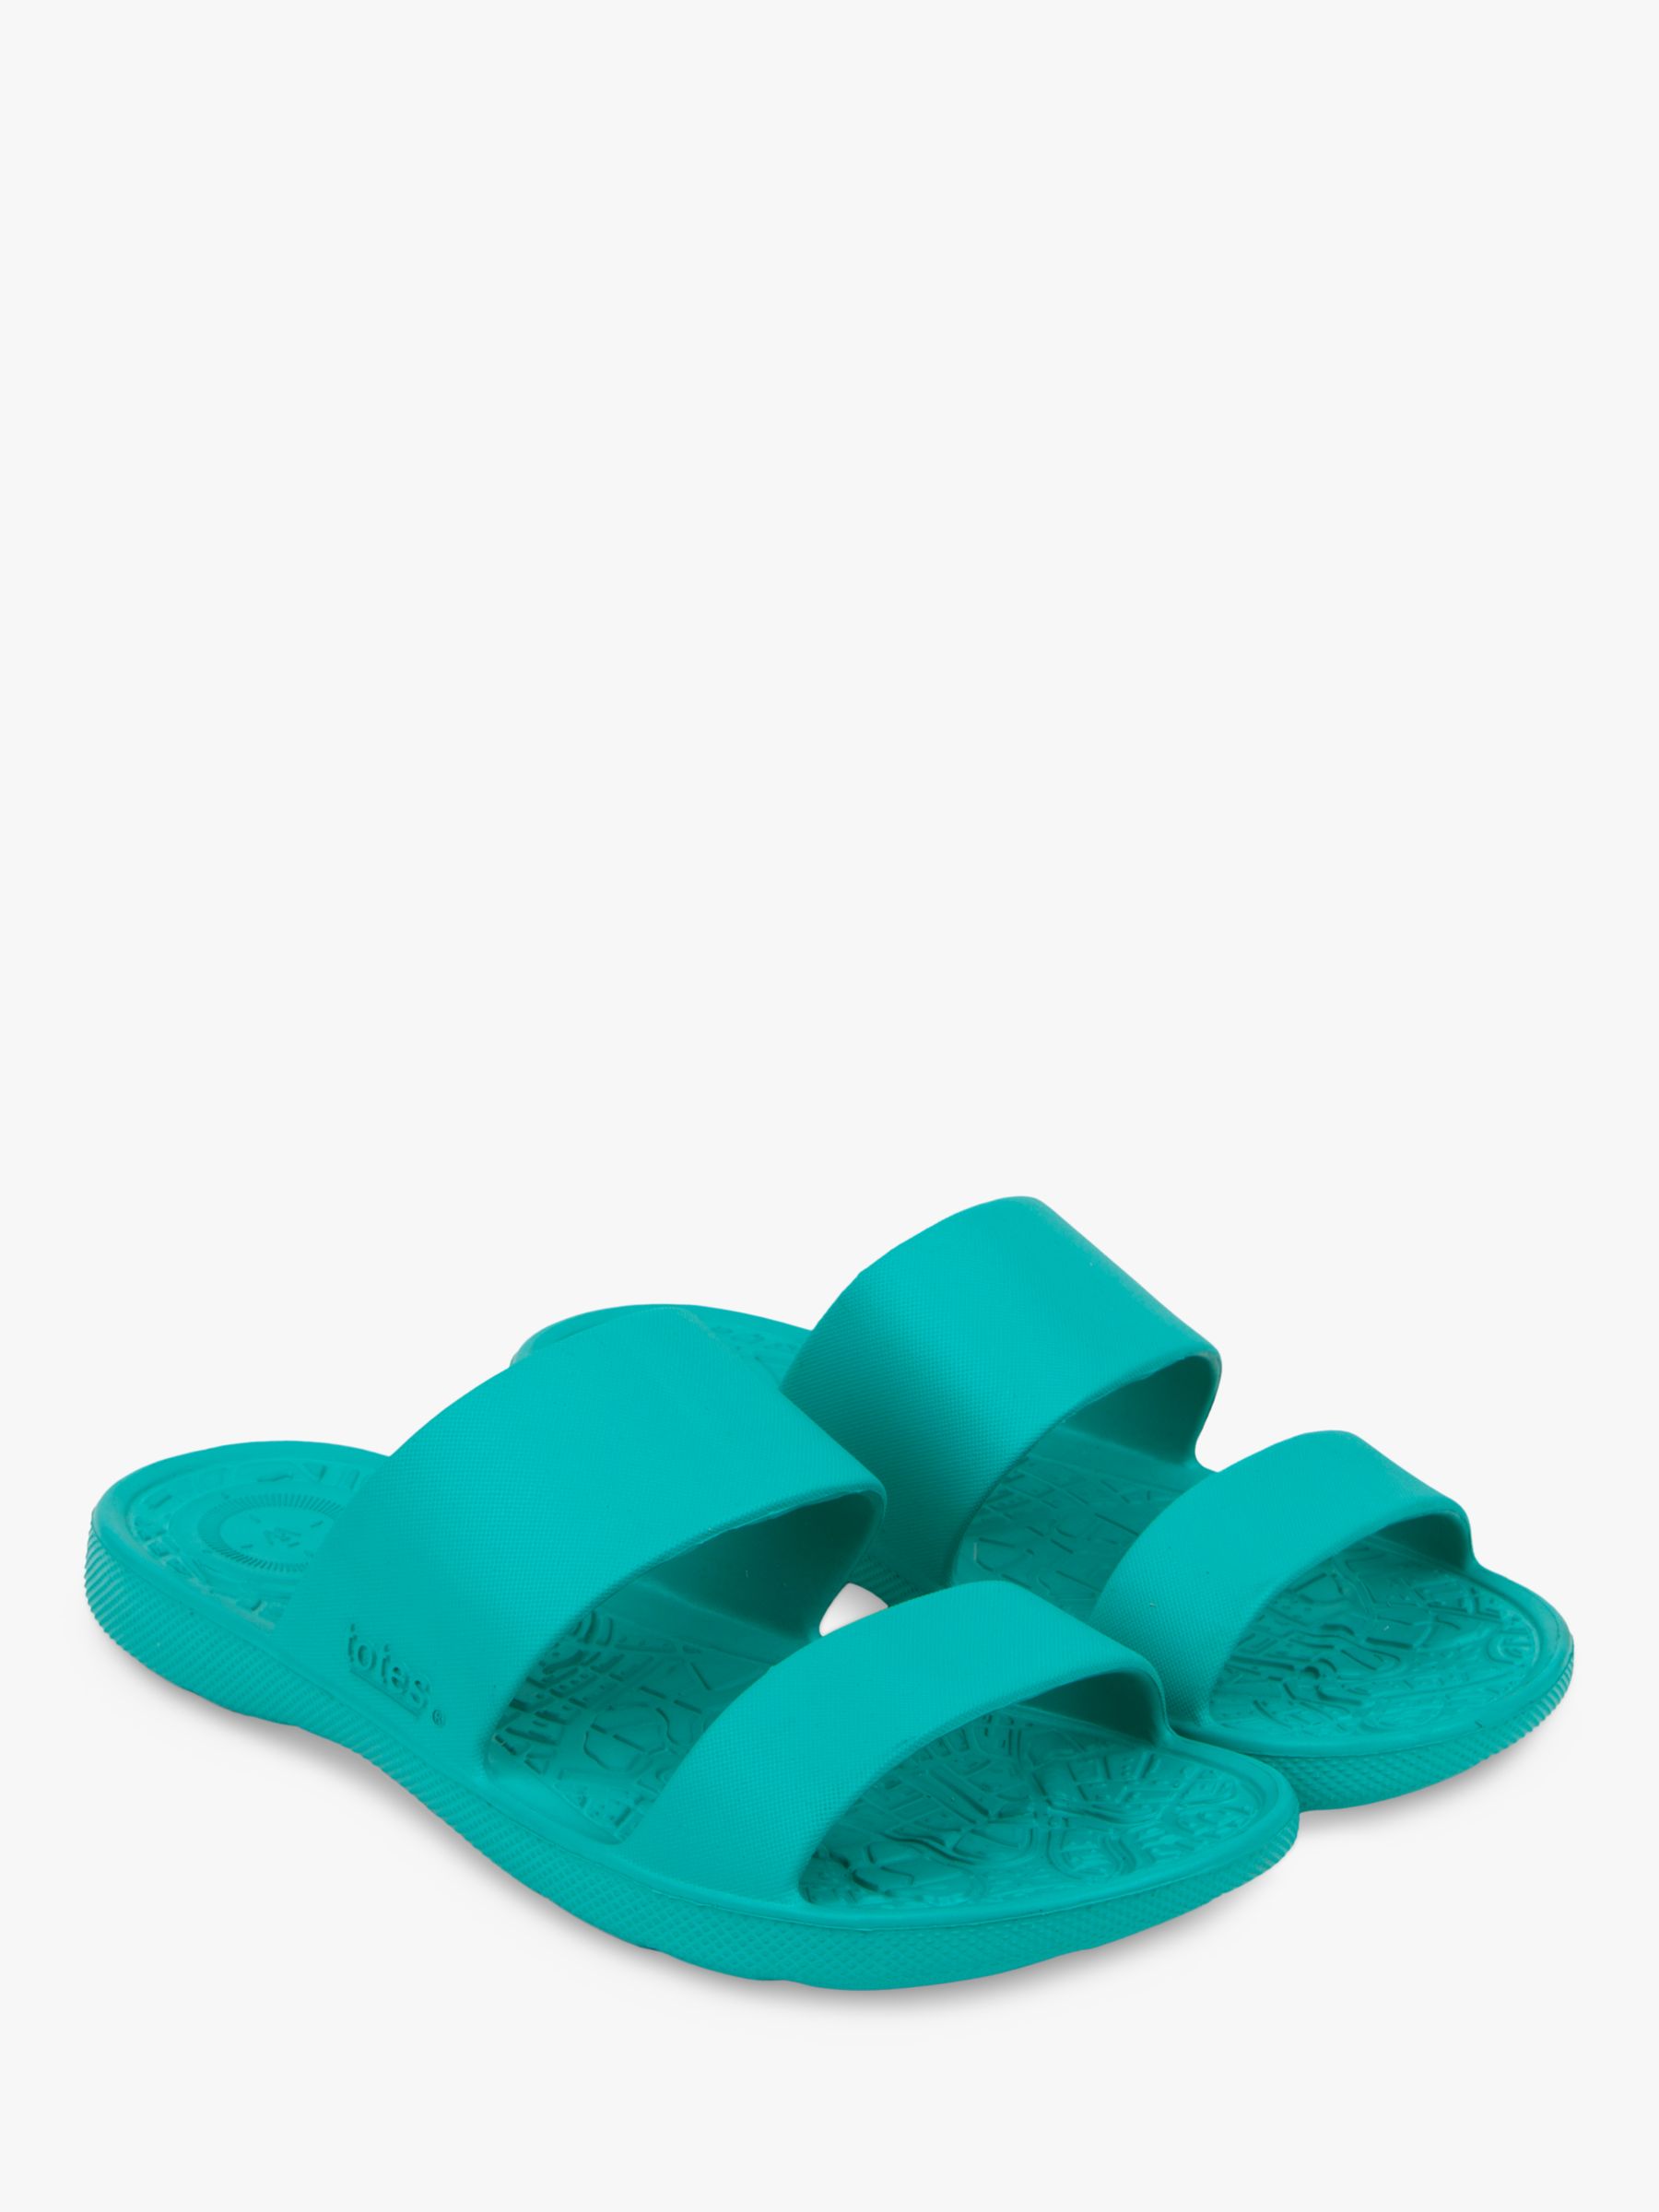 totes SOLBOUNCE Double Strap Slider Sandals, Turquoise at John Lewis ...